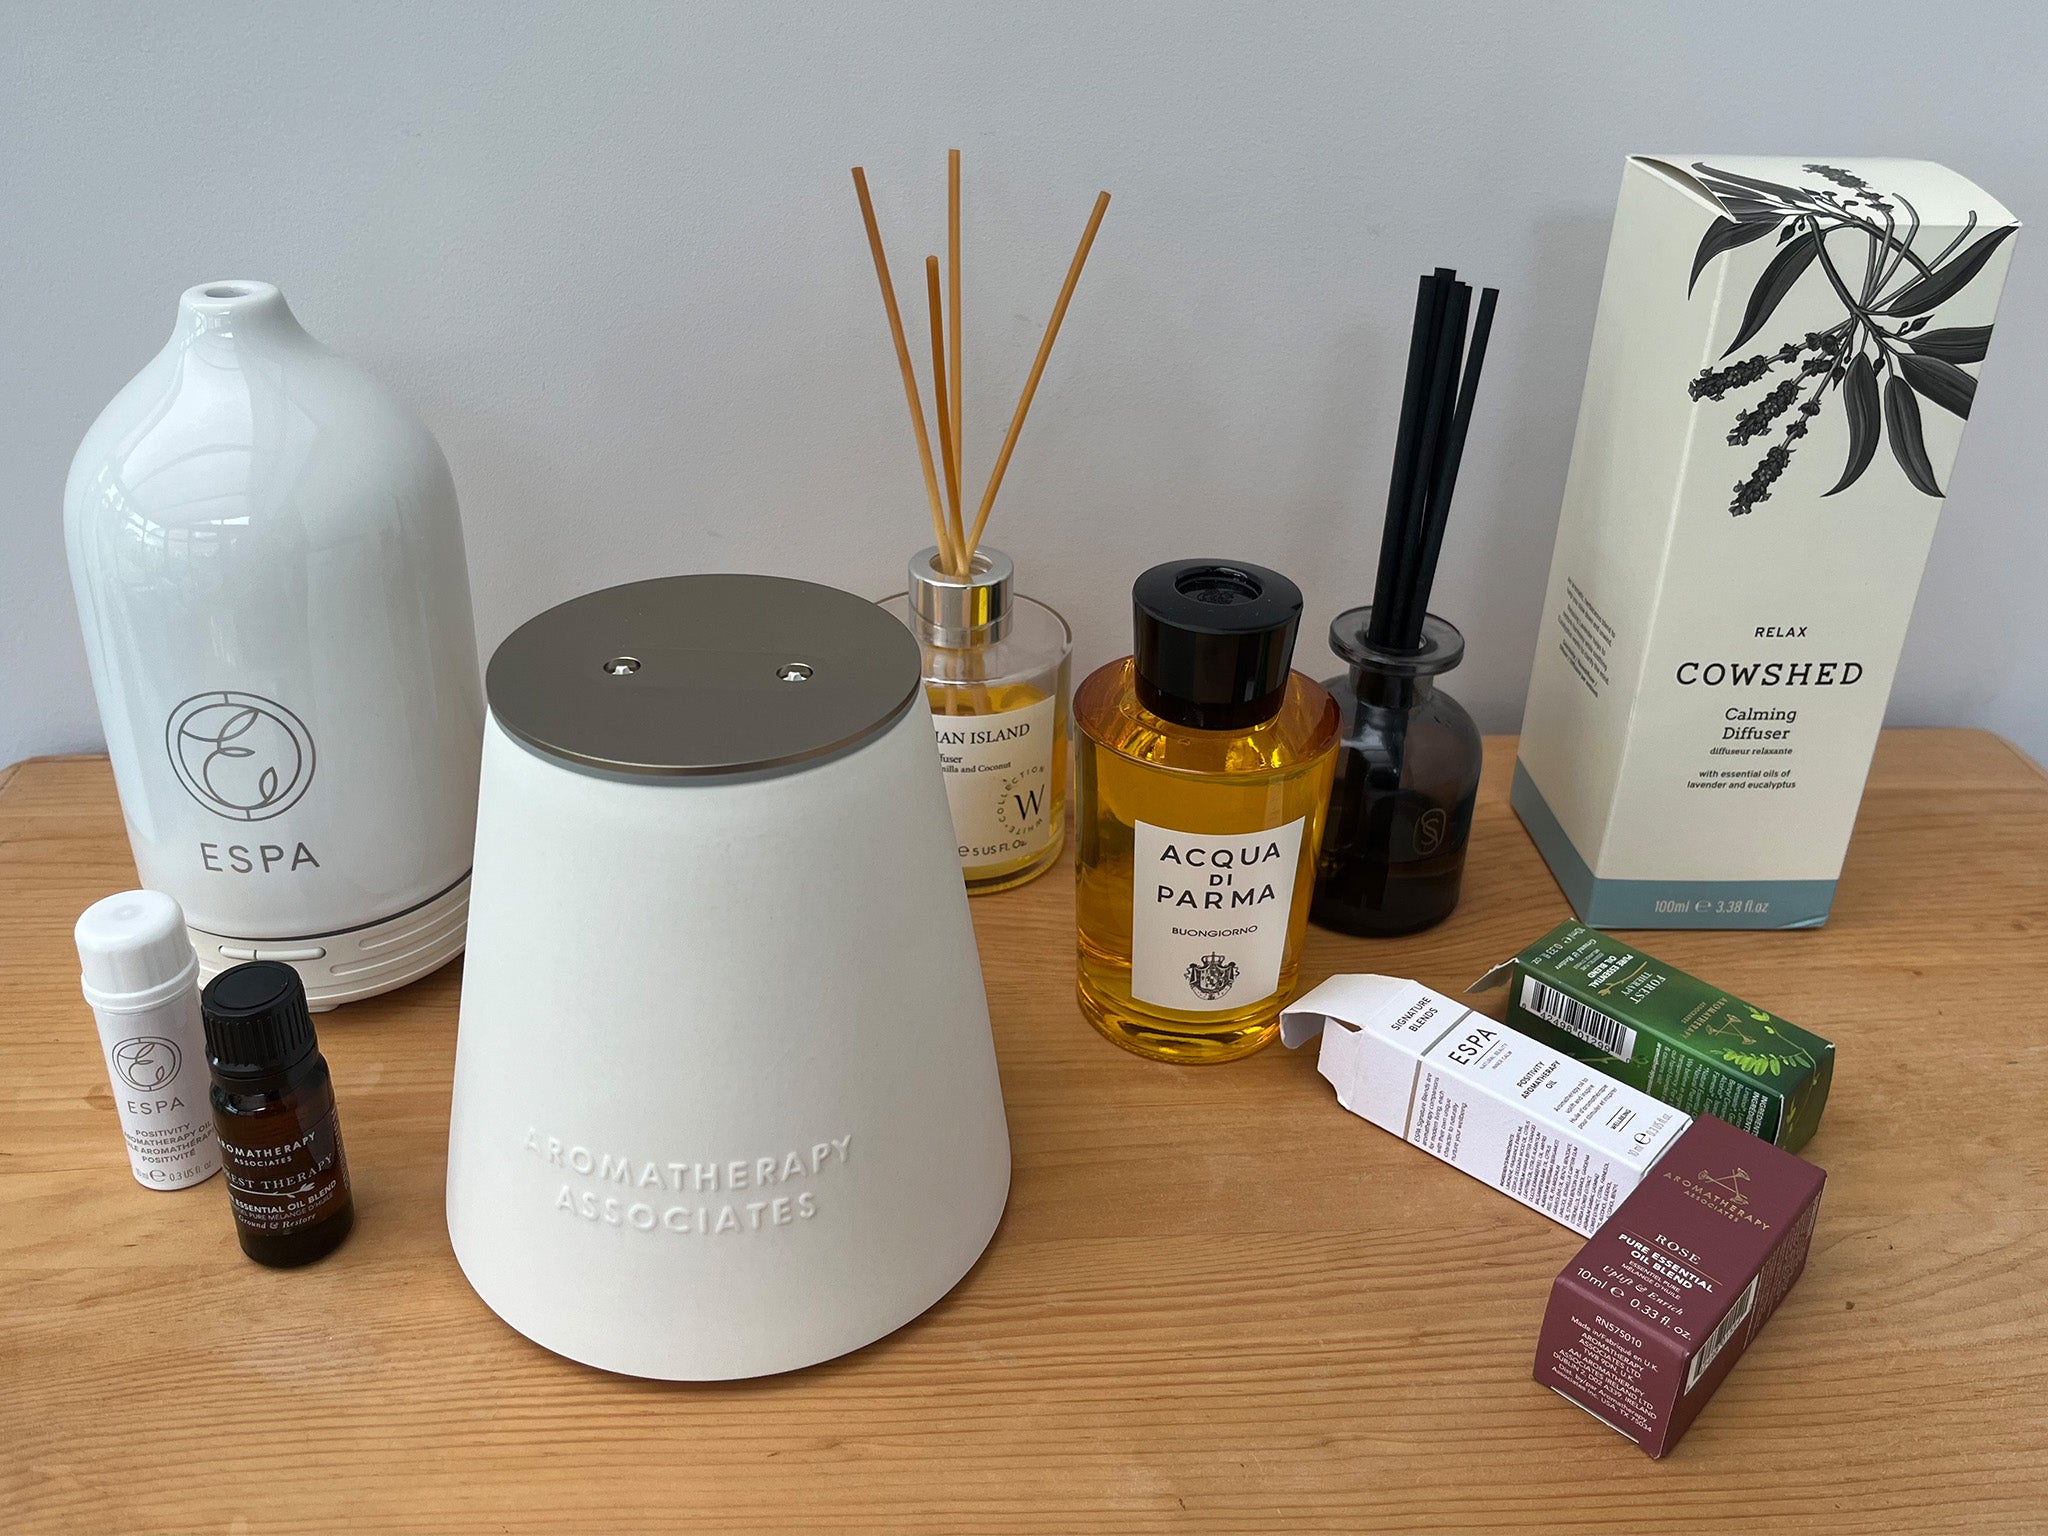 We put myriad oil diffusers to the test, and our home has never smelt so good